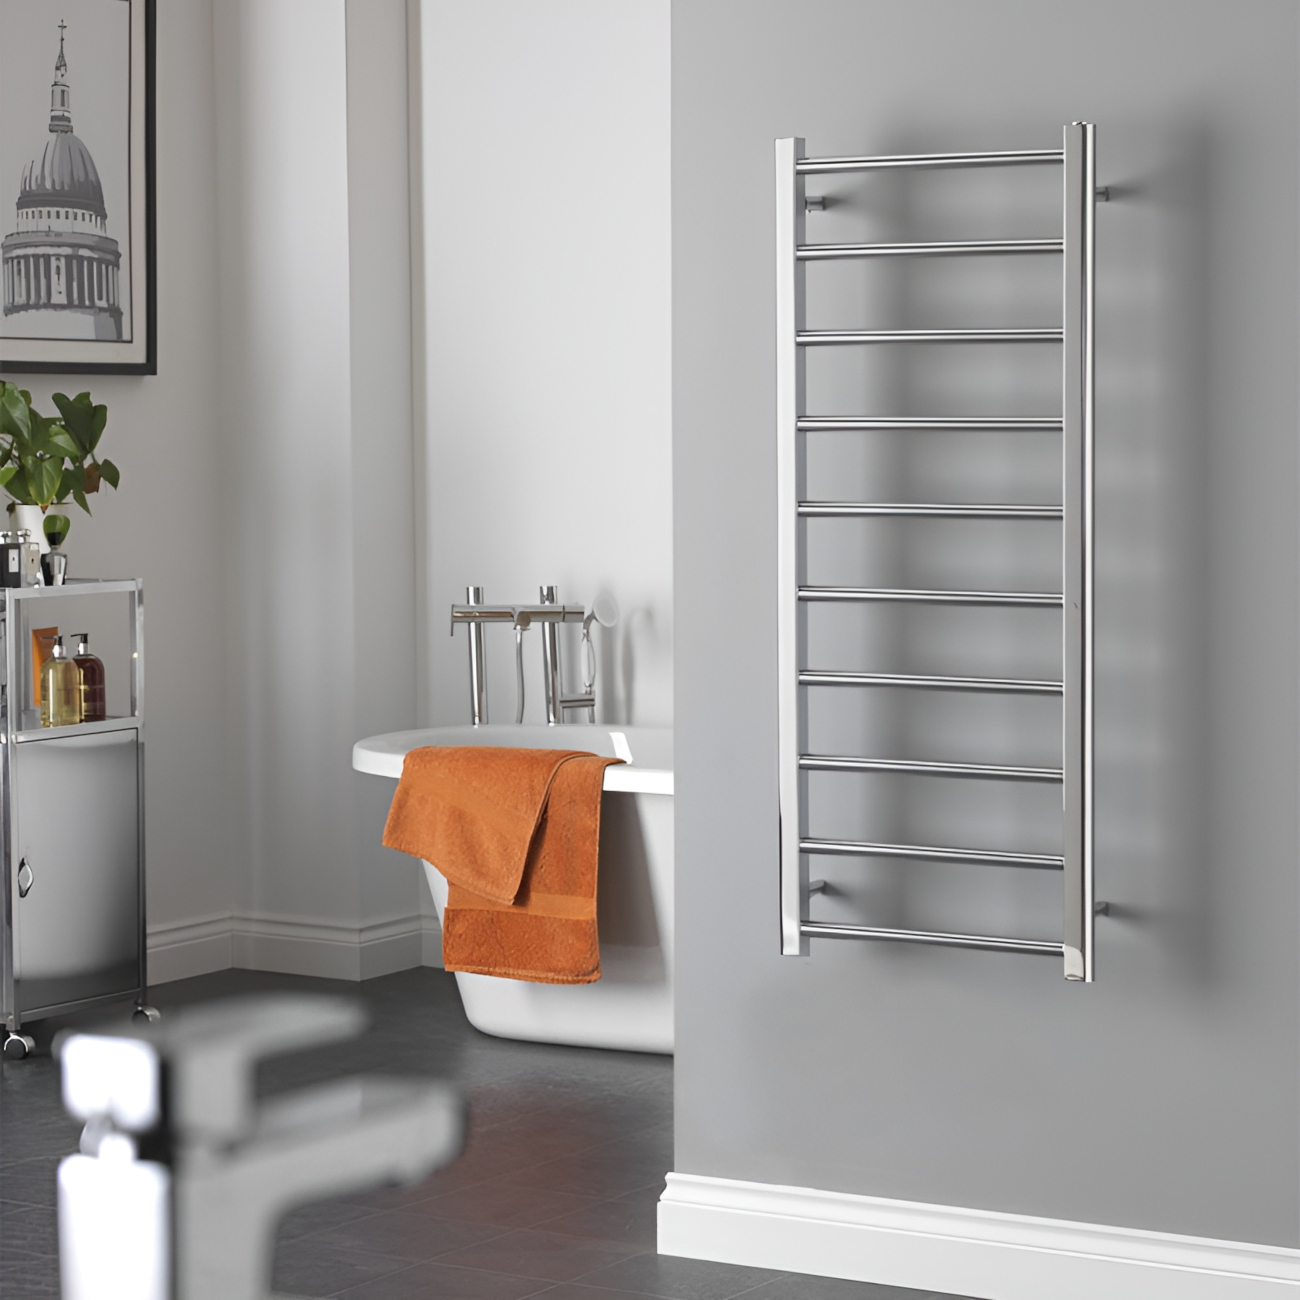 ALPINE Modern Heated Towel Rail / Warmer / Radiator, Chrome – Central Heating Best Quality & Price, Energy Saving / Economic To Run Buy Online From Adax SolAire UK Shop